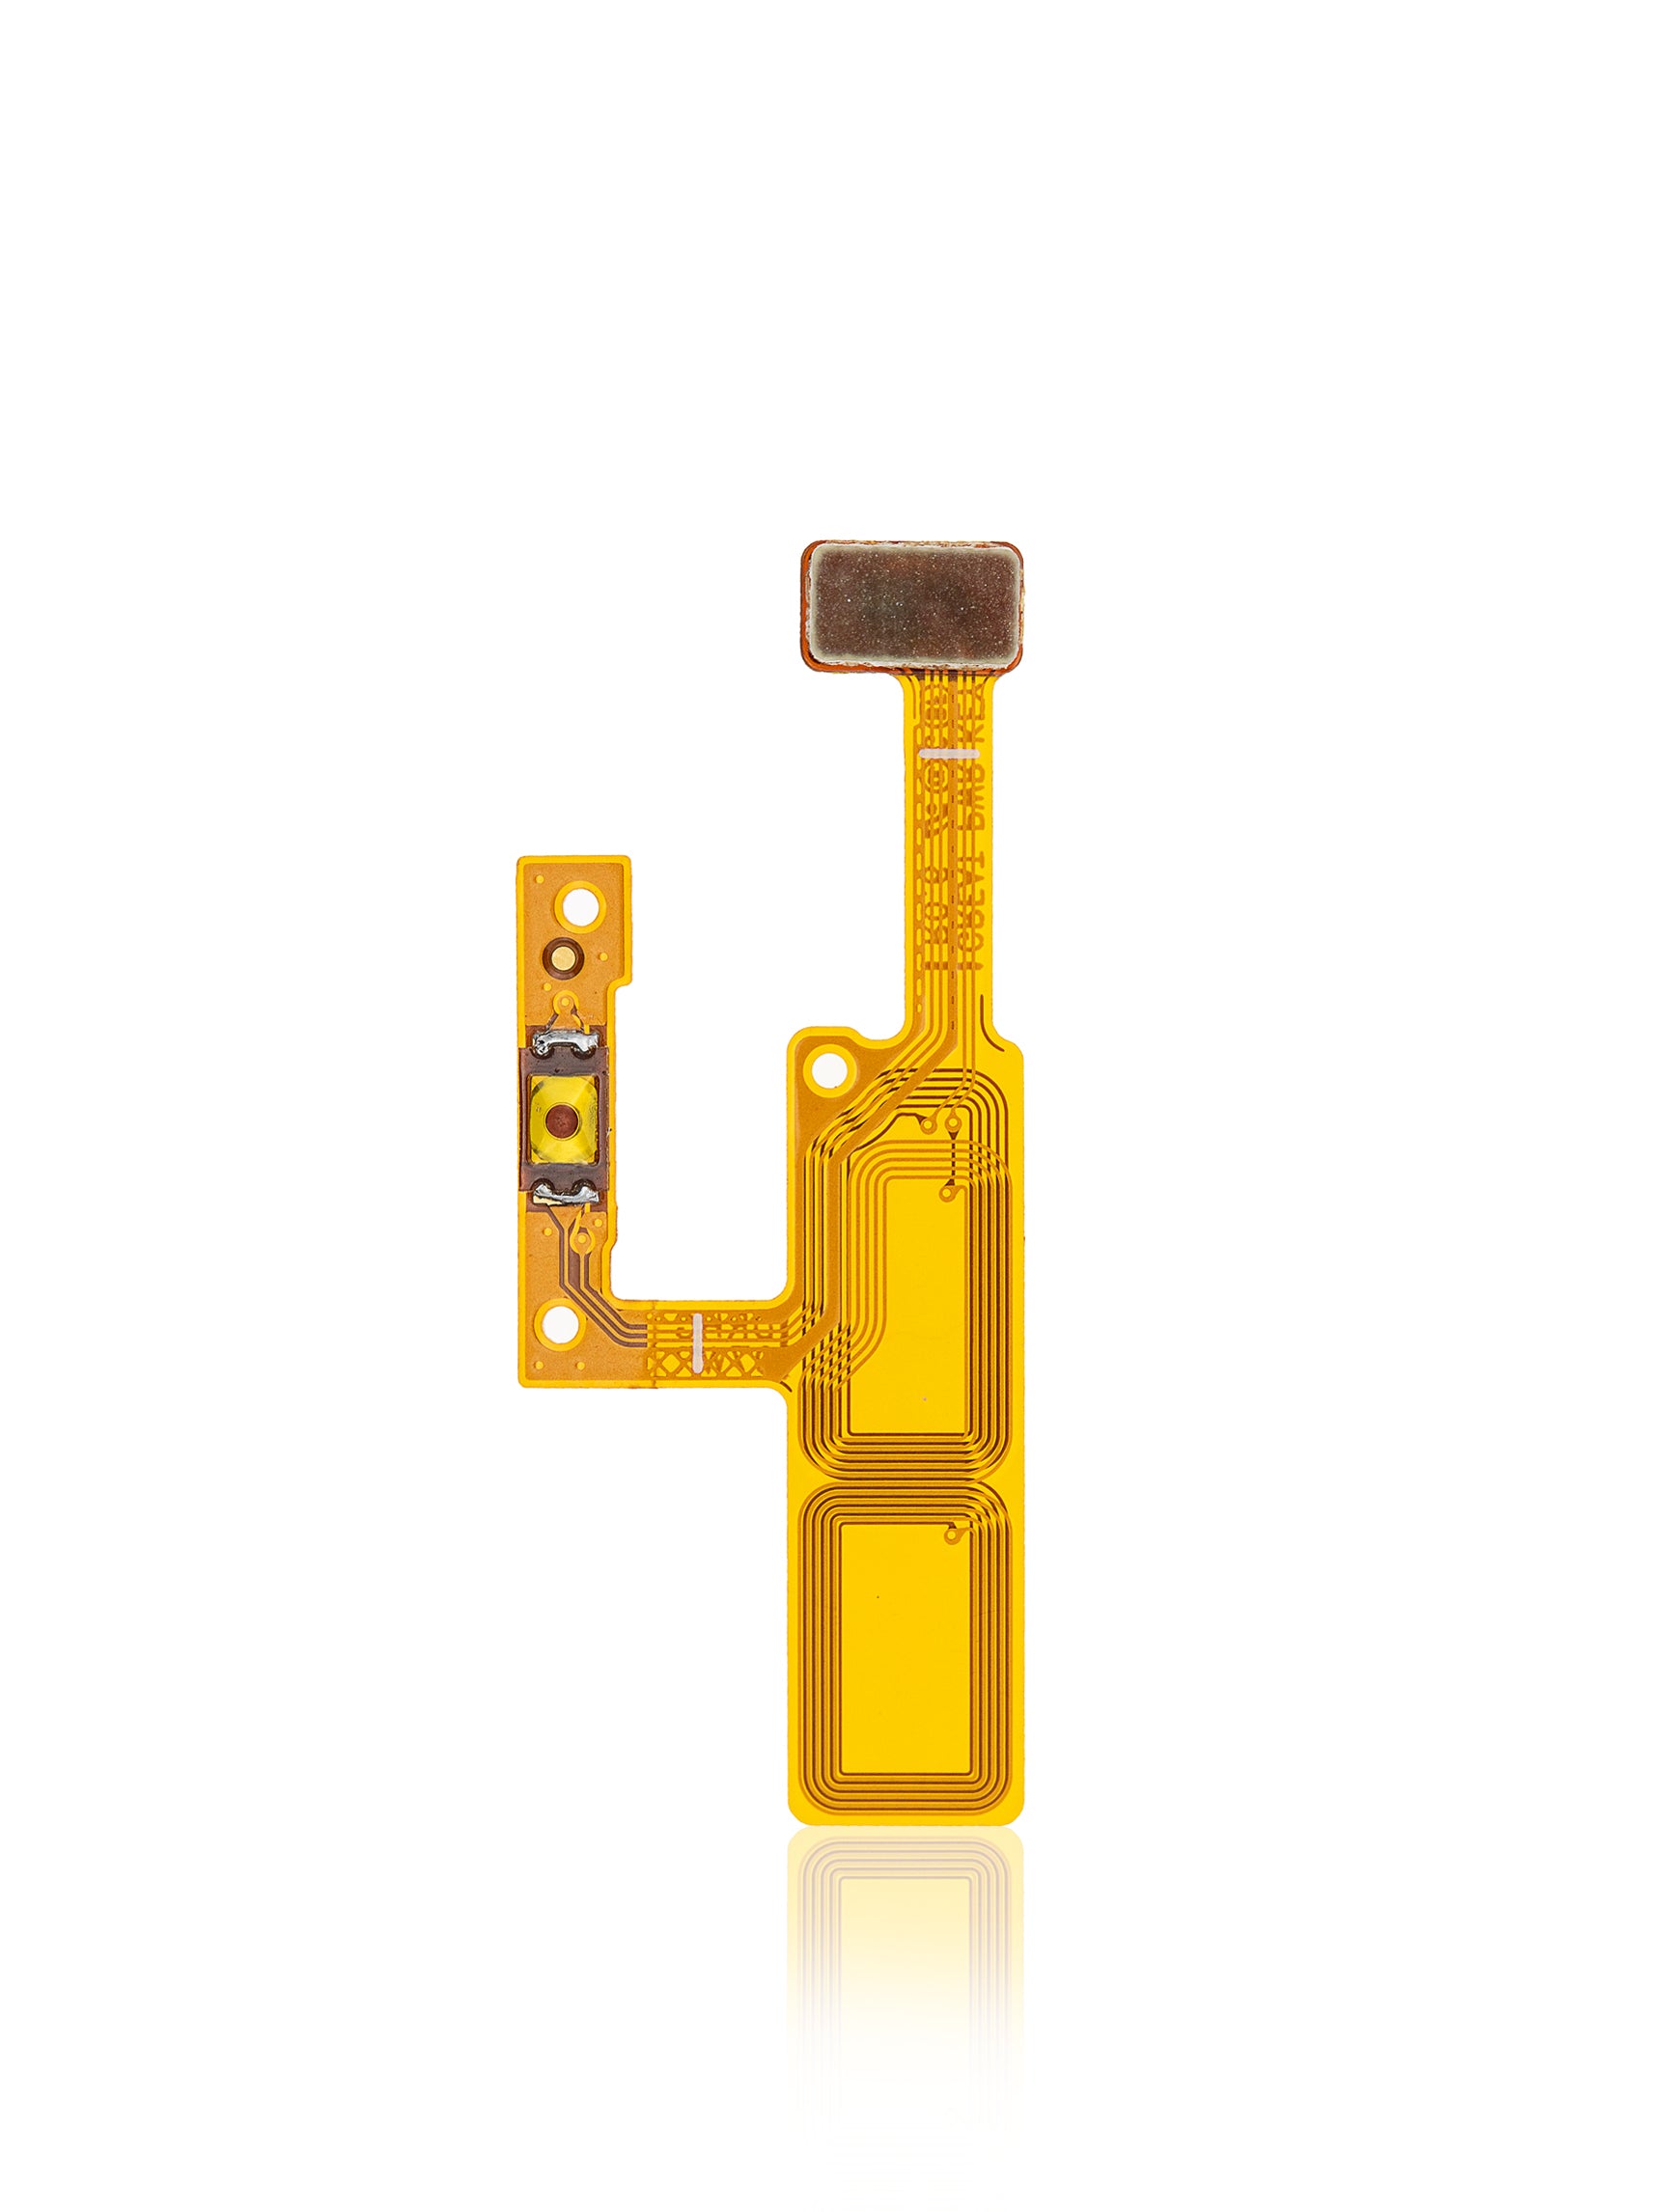 For Samsung Galaxy Note 8 Power Button Flex Cable Replacement